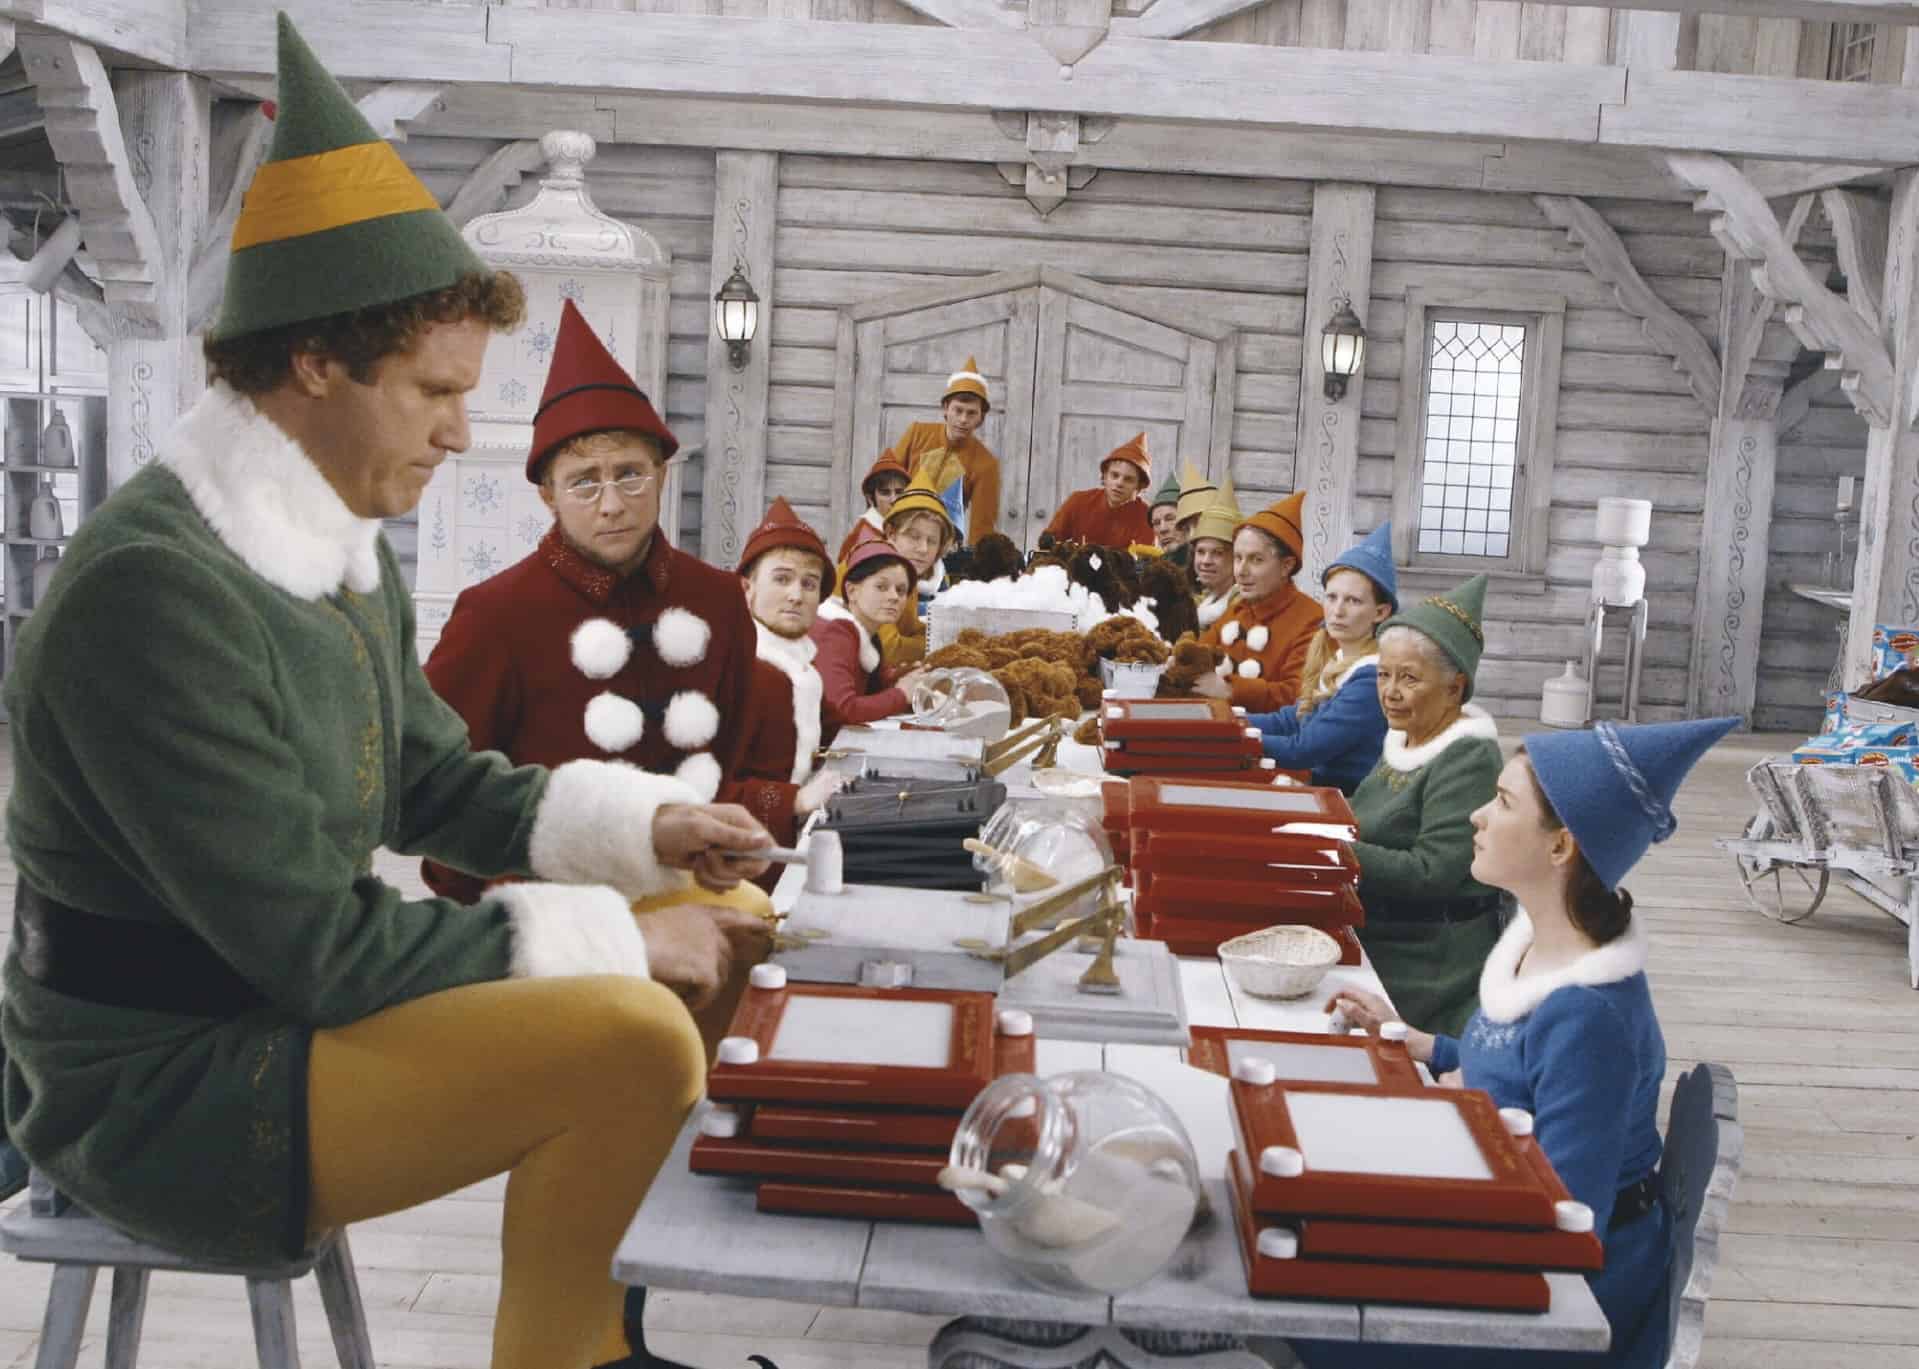 One elf towers over the other elves in Santa’s Workshop in this image from New Line Cinema.